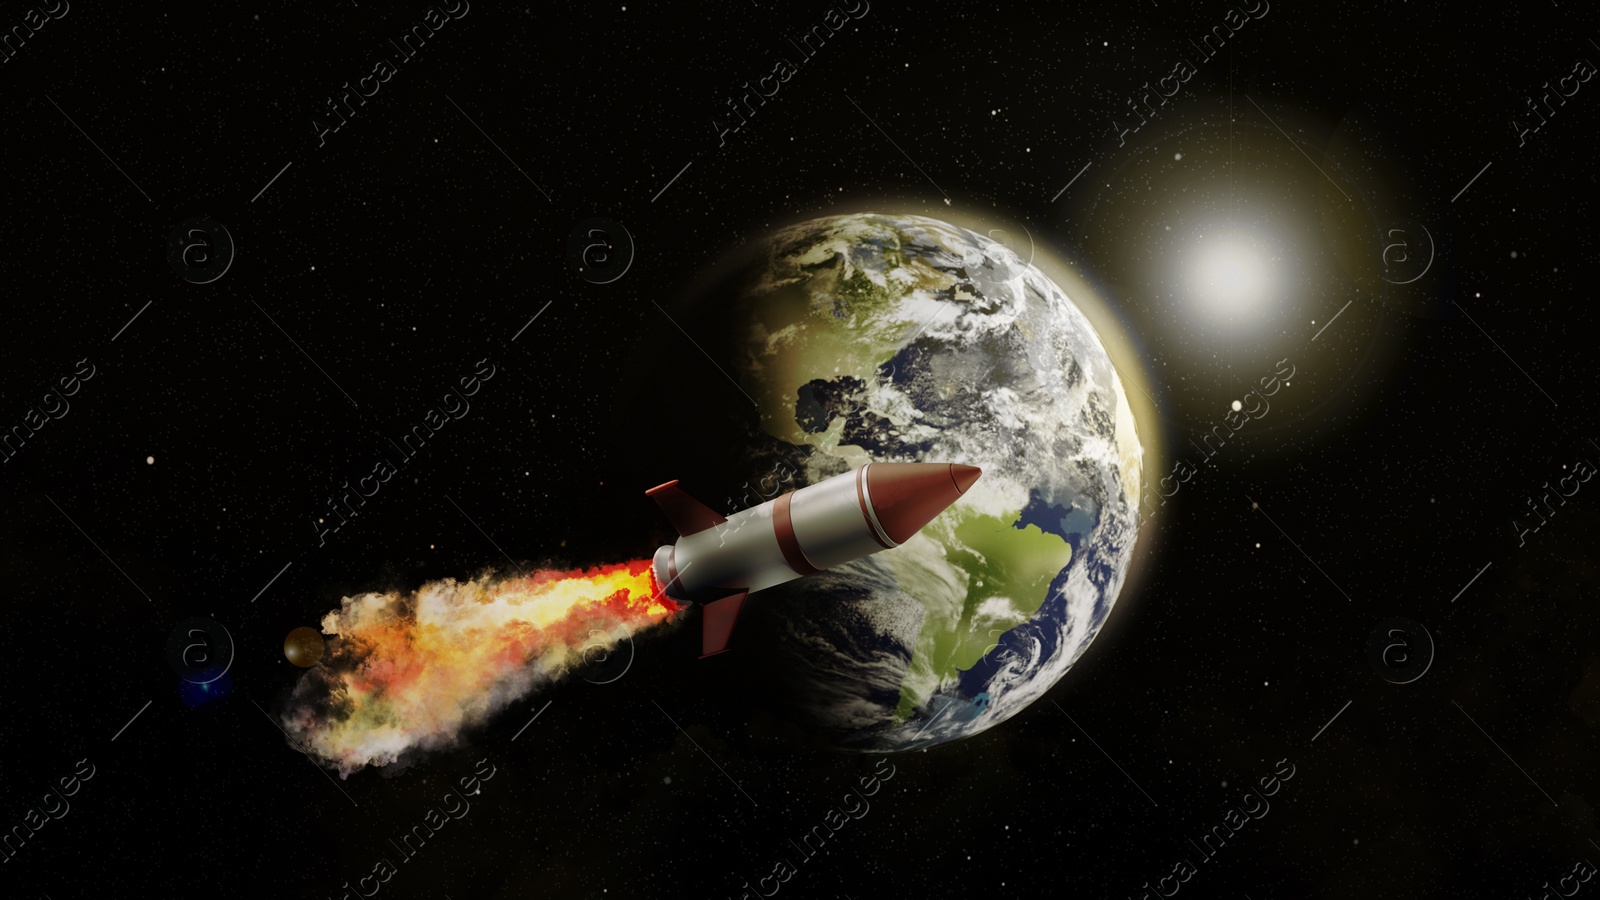 Image of Rocket flying near planet in space, banner design